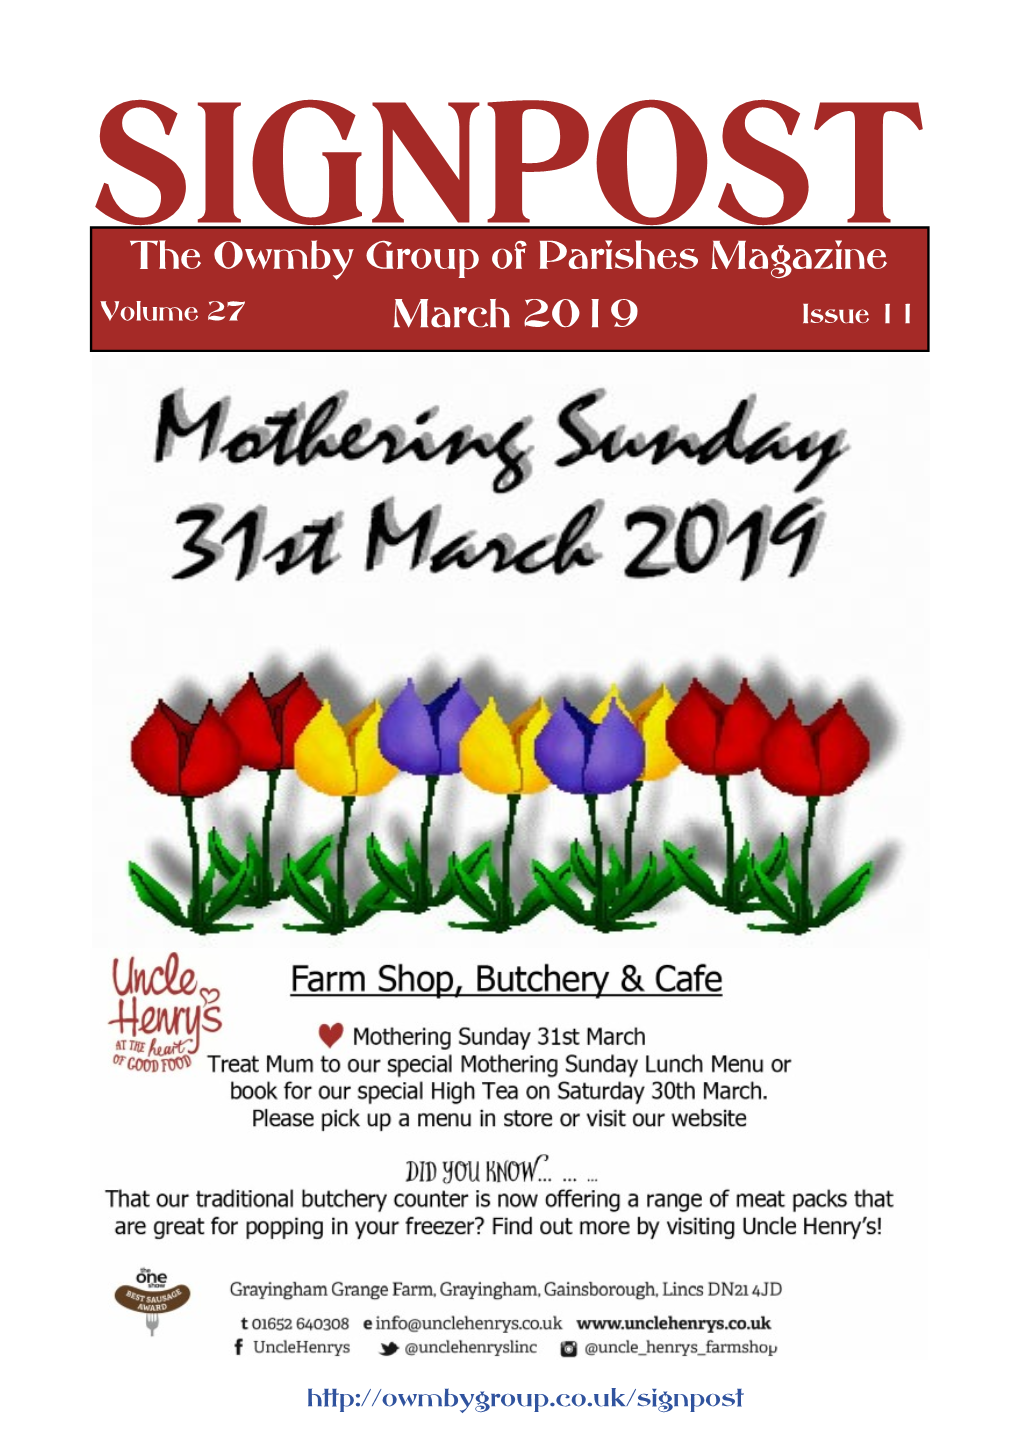 The Owmby Group of Parishes Magazine March 2019